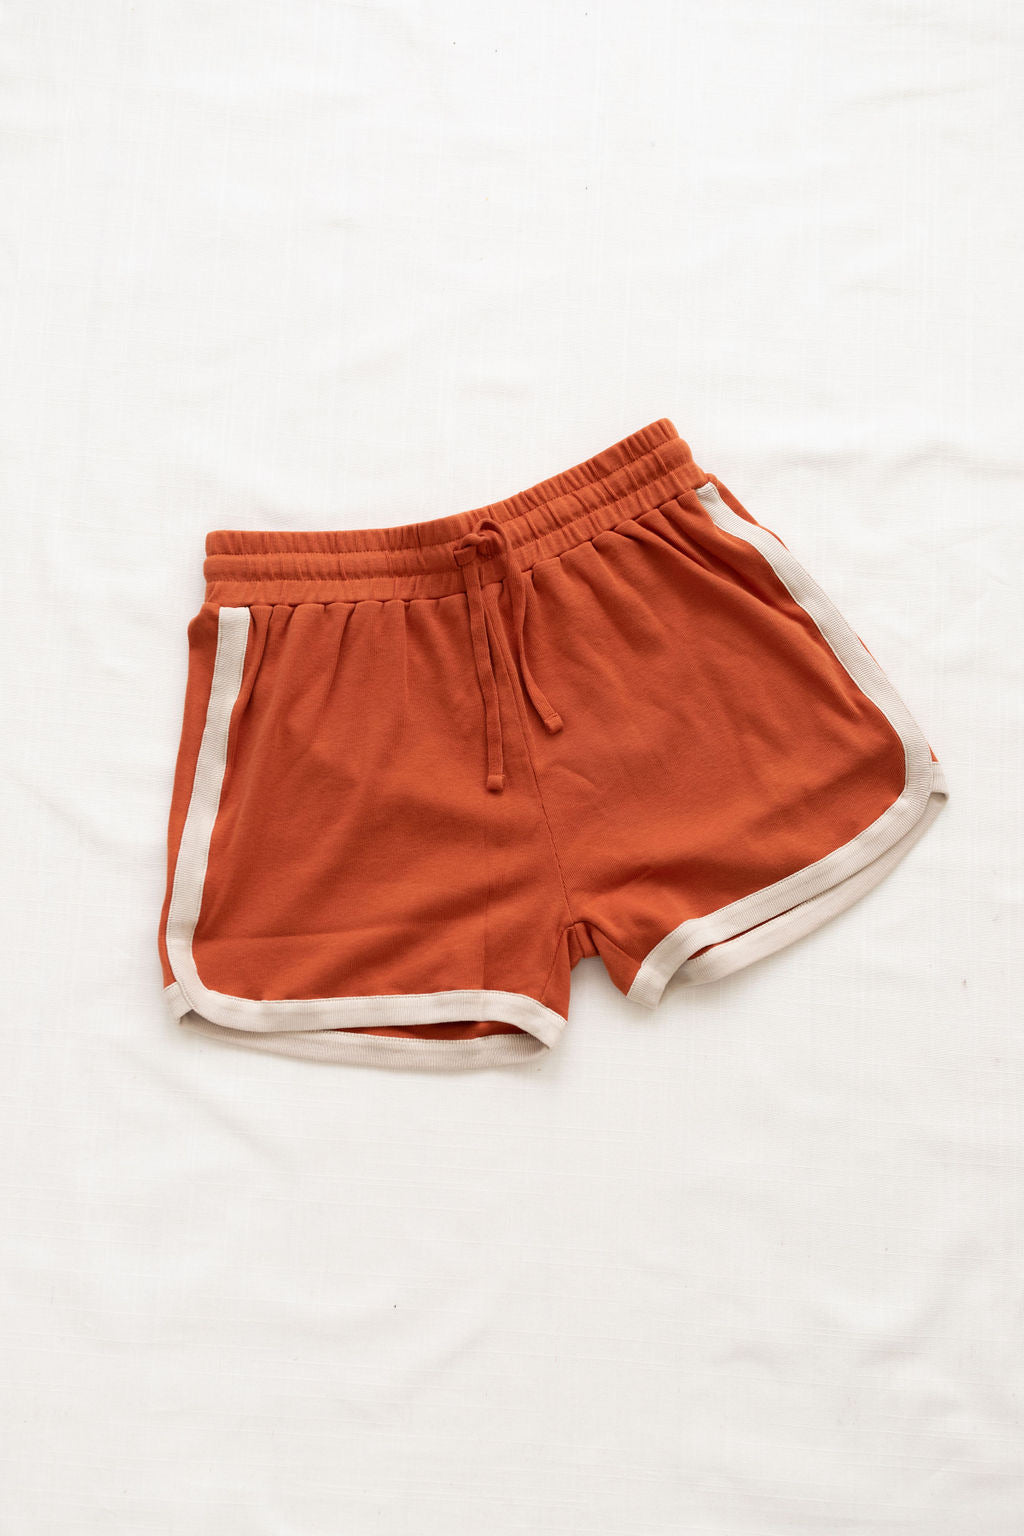 Fin & Vince Vintage Trackie Shorts Brick with Oat accents